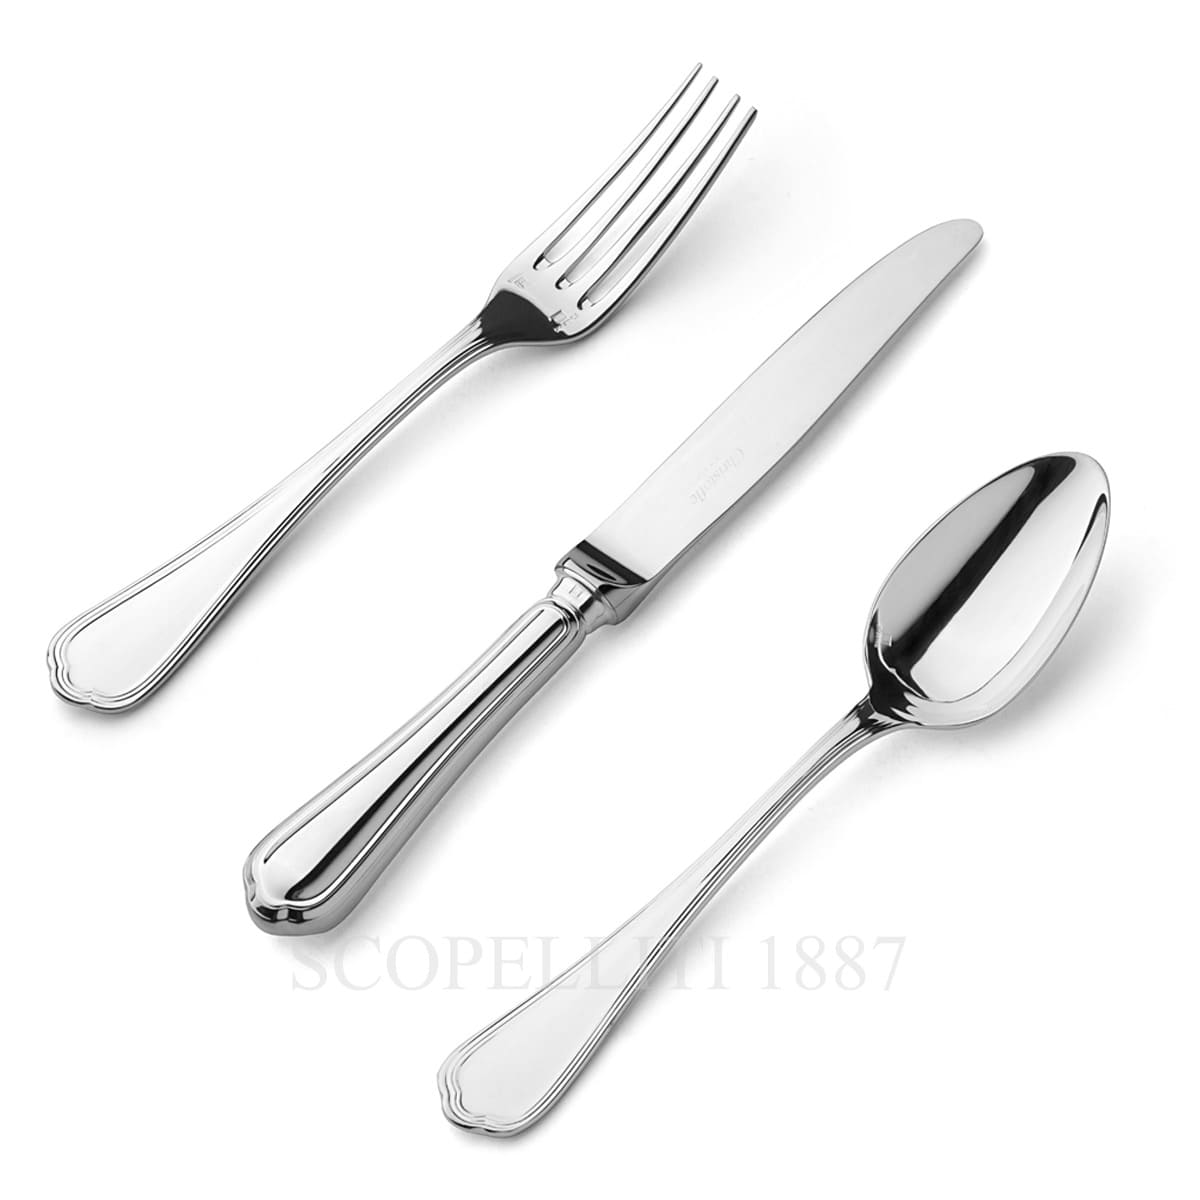 Christofle Spatours Silver Plated Cutlery Set